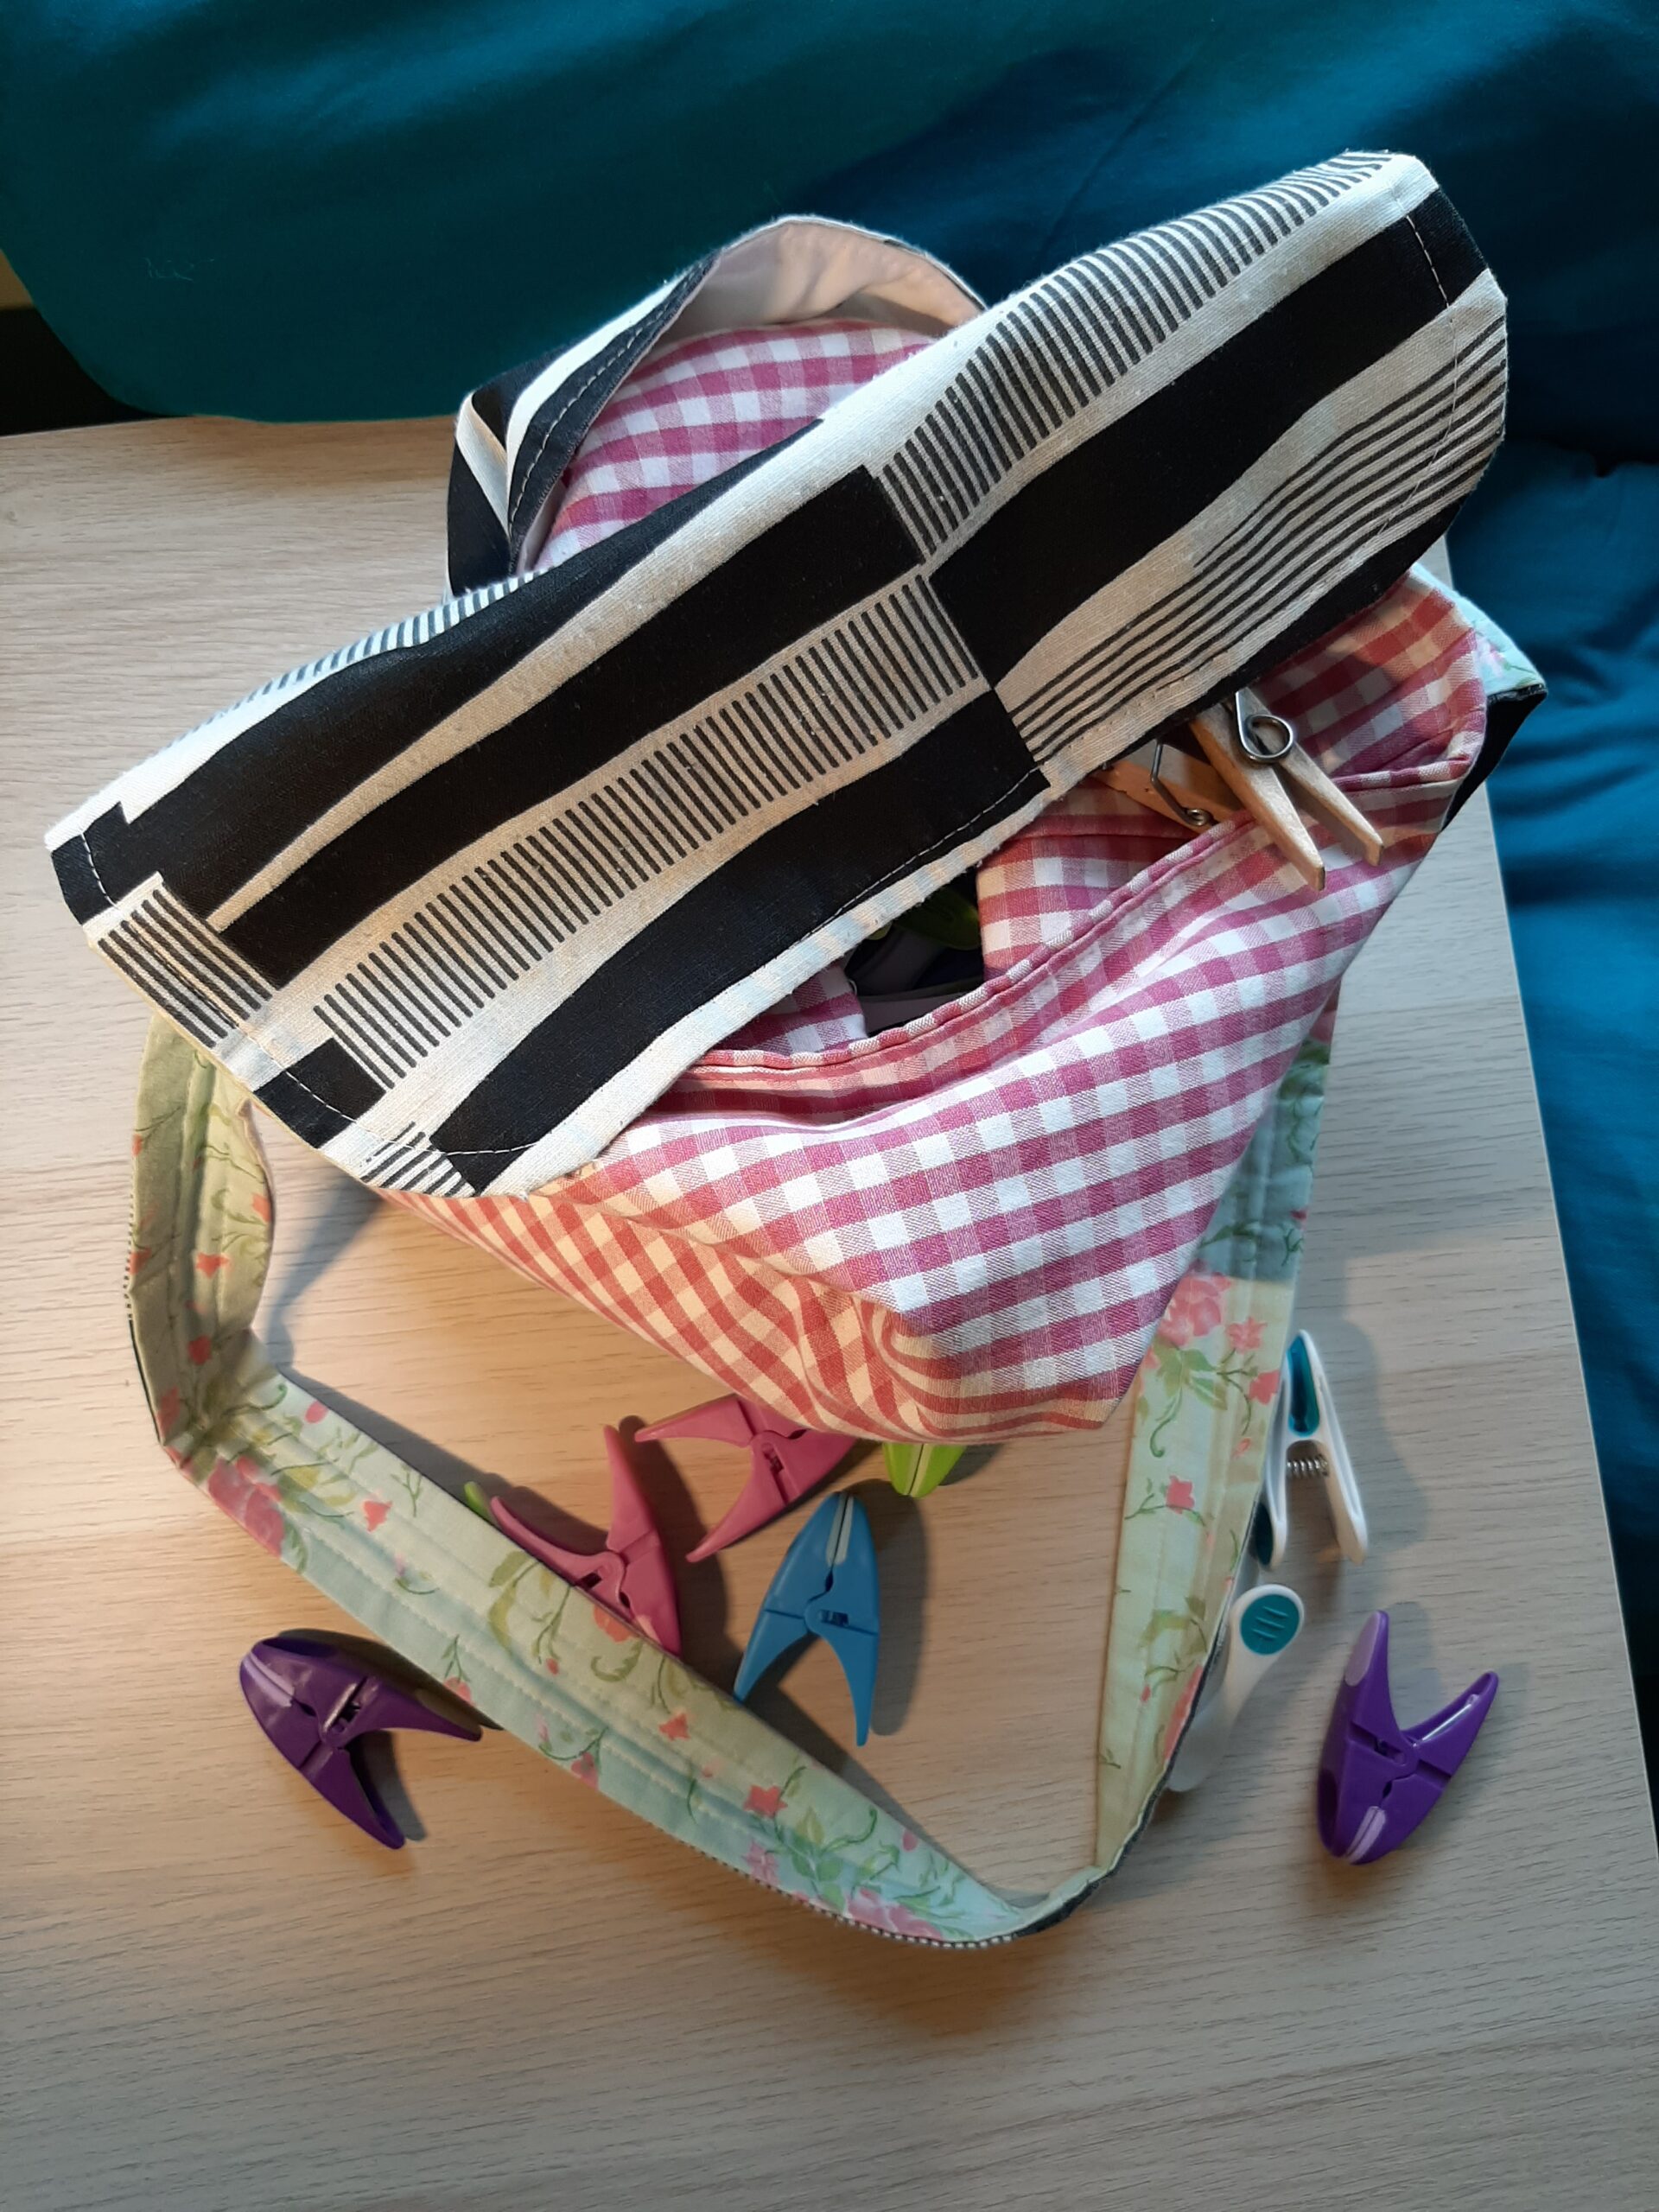 home made peg bag includes red gingham fabric